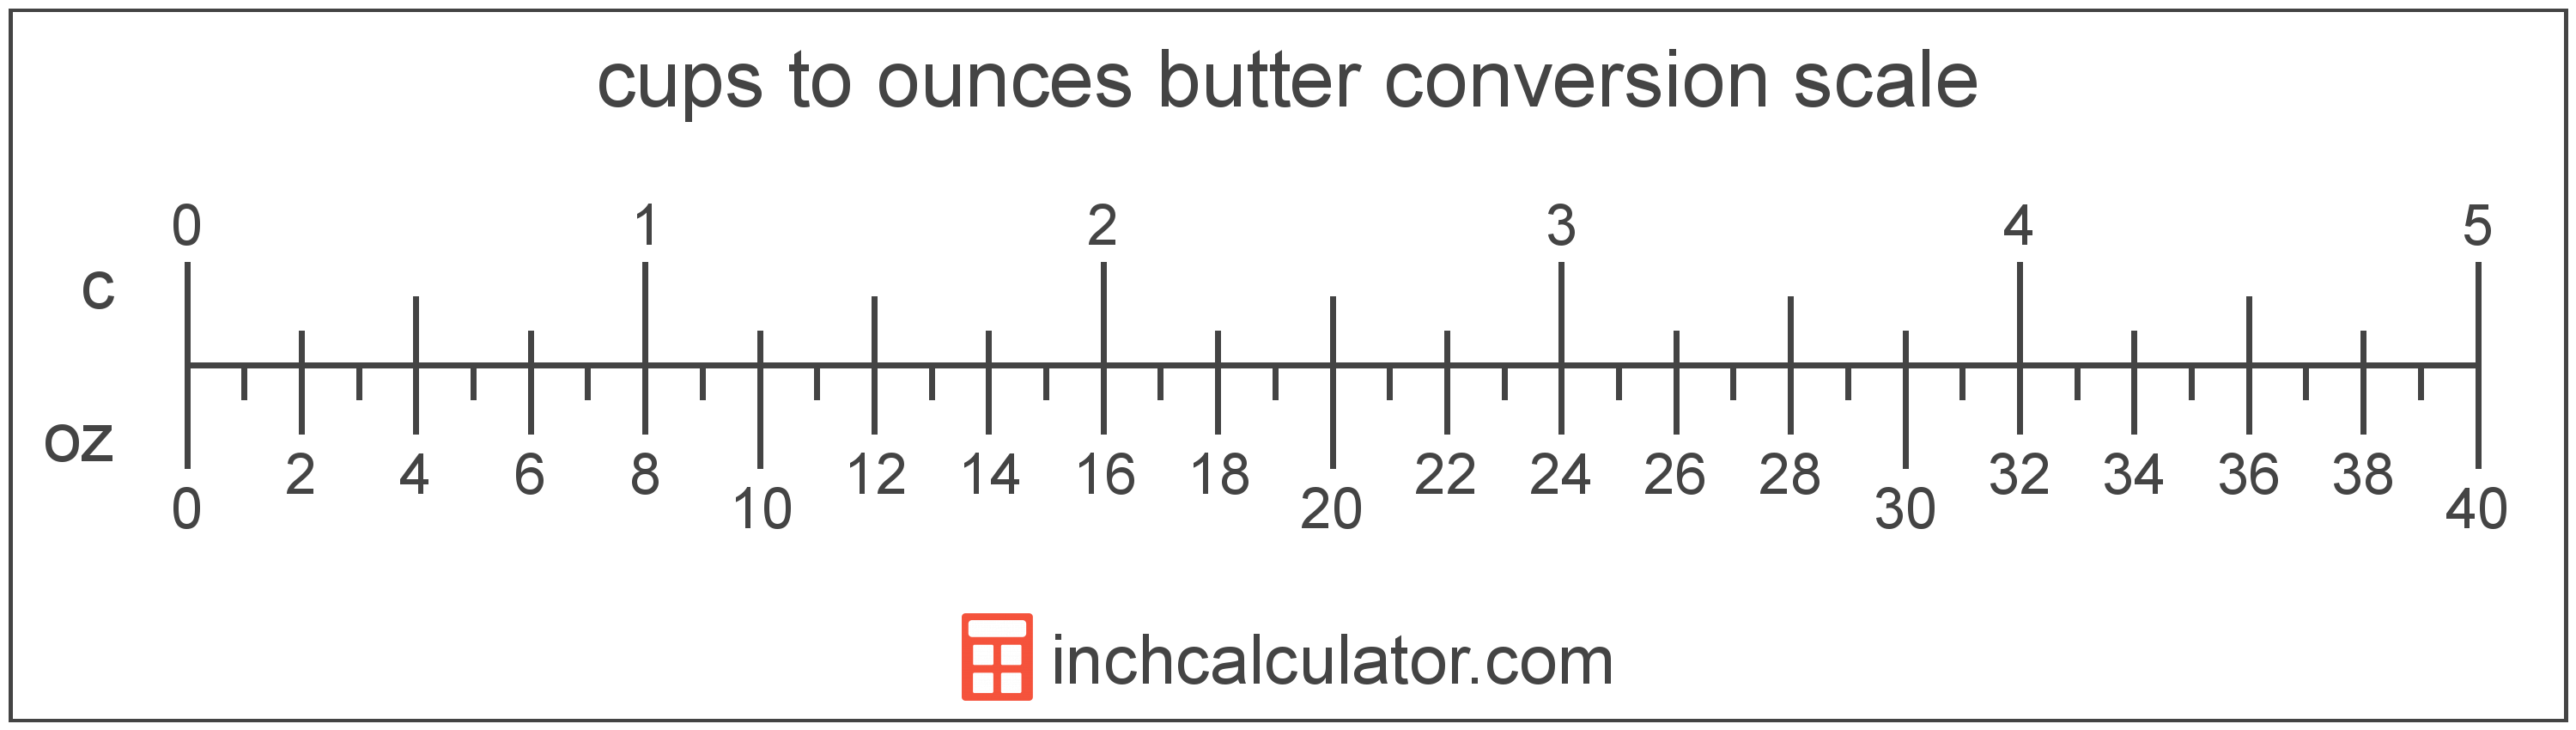 conversion scale showing ounces and equivalent cups butter values